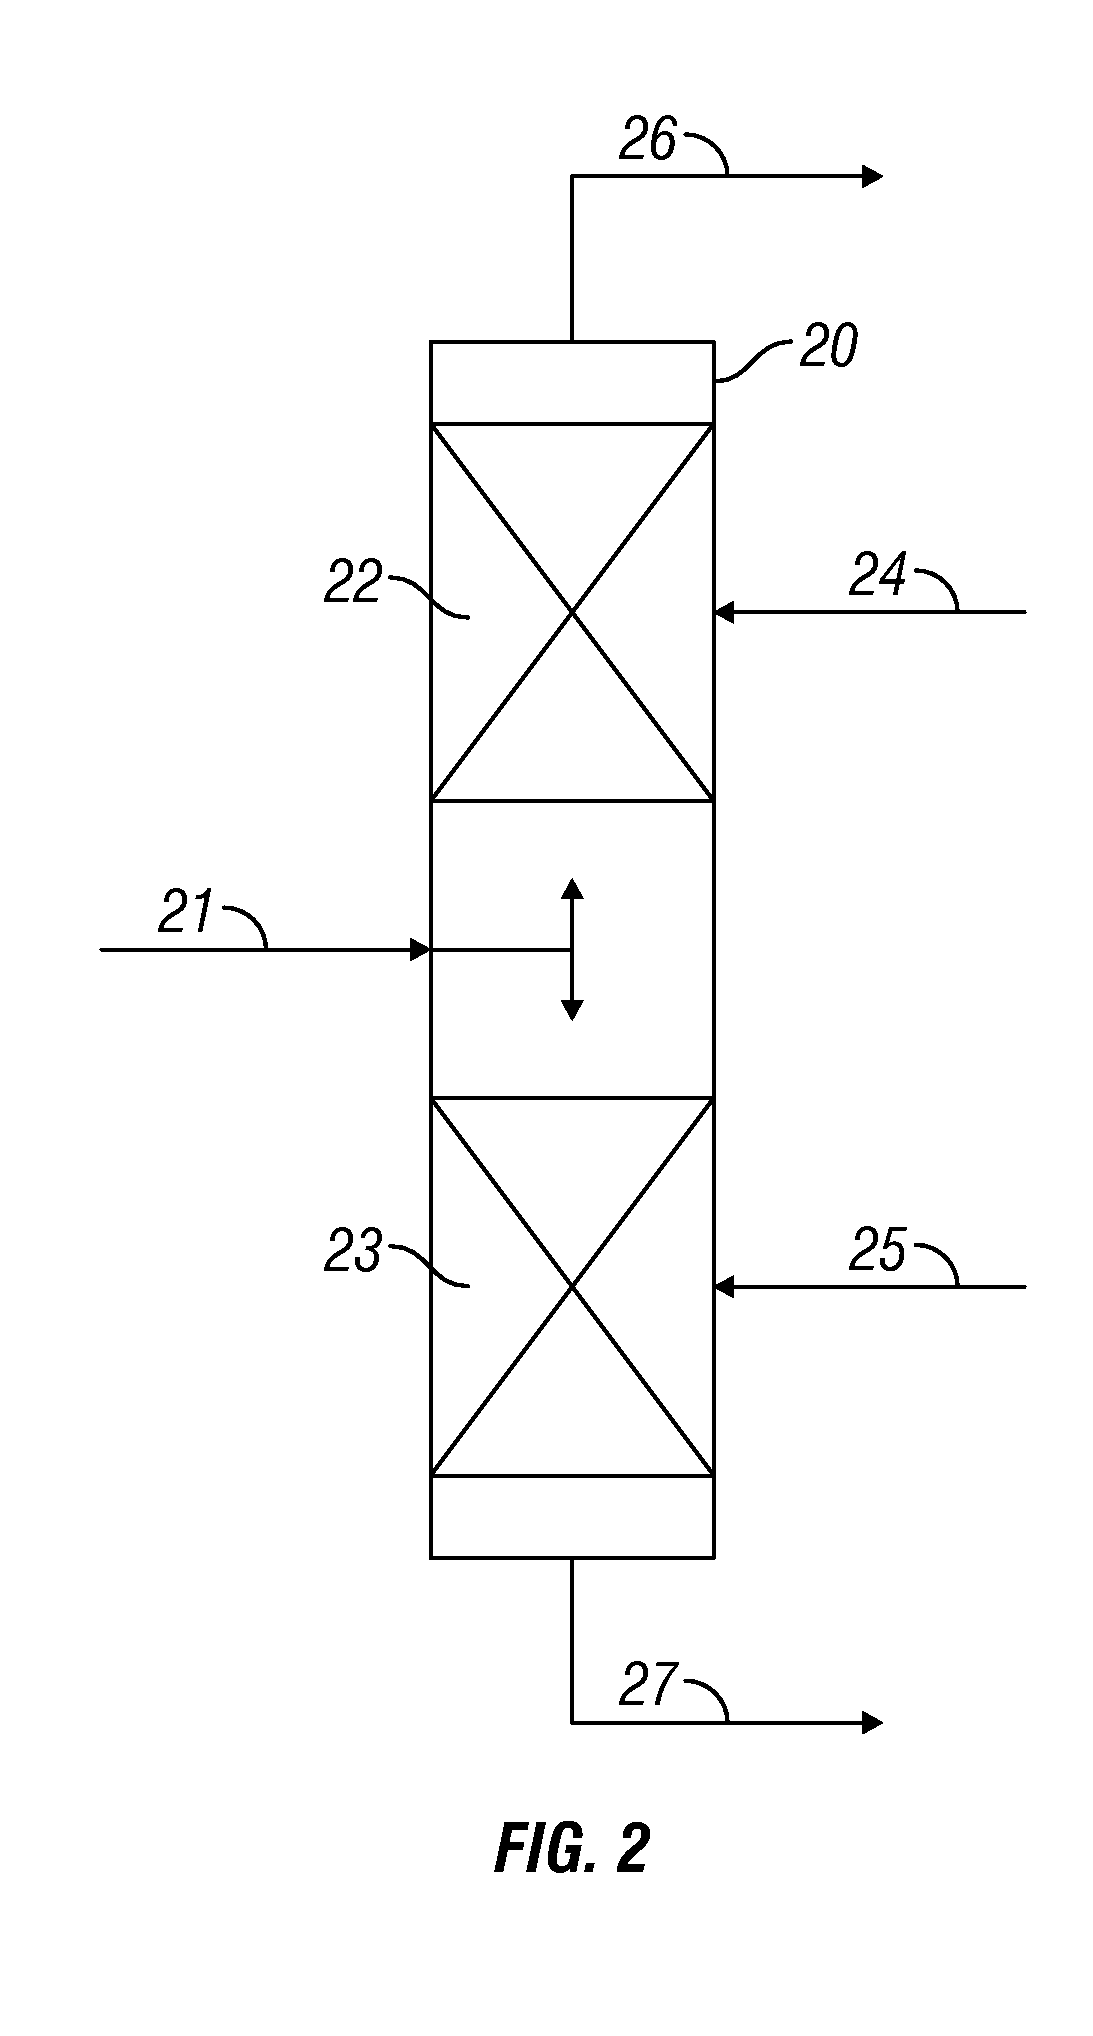 Process for the selective hydrodesulfurization of a gasoline feedstock containing high levels of olefins